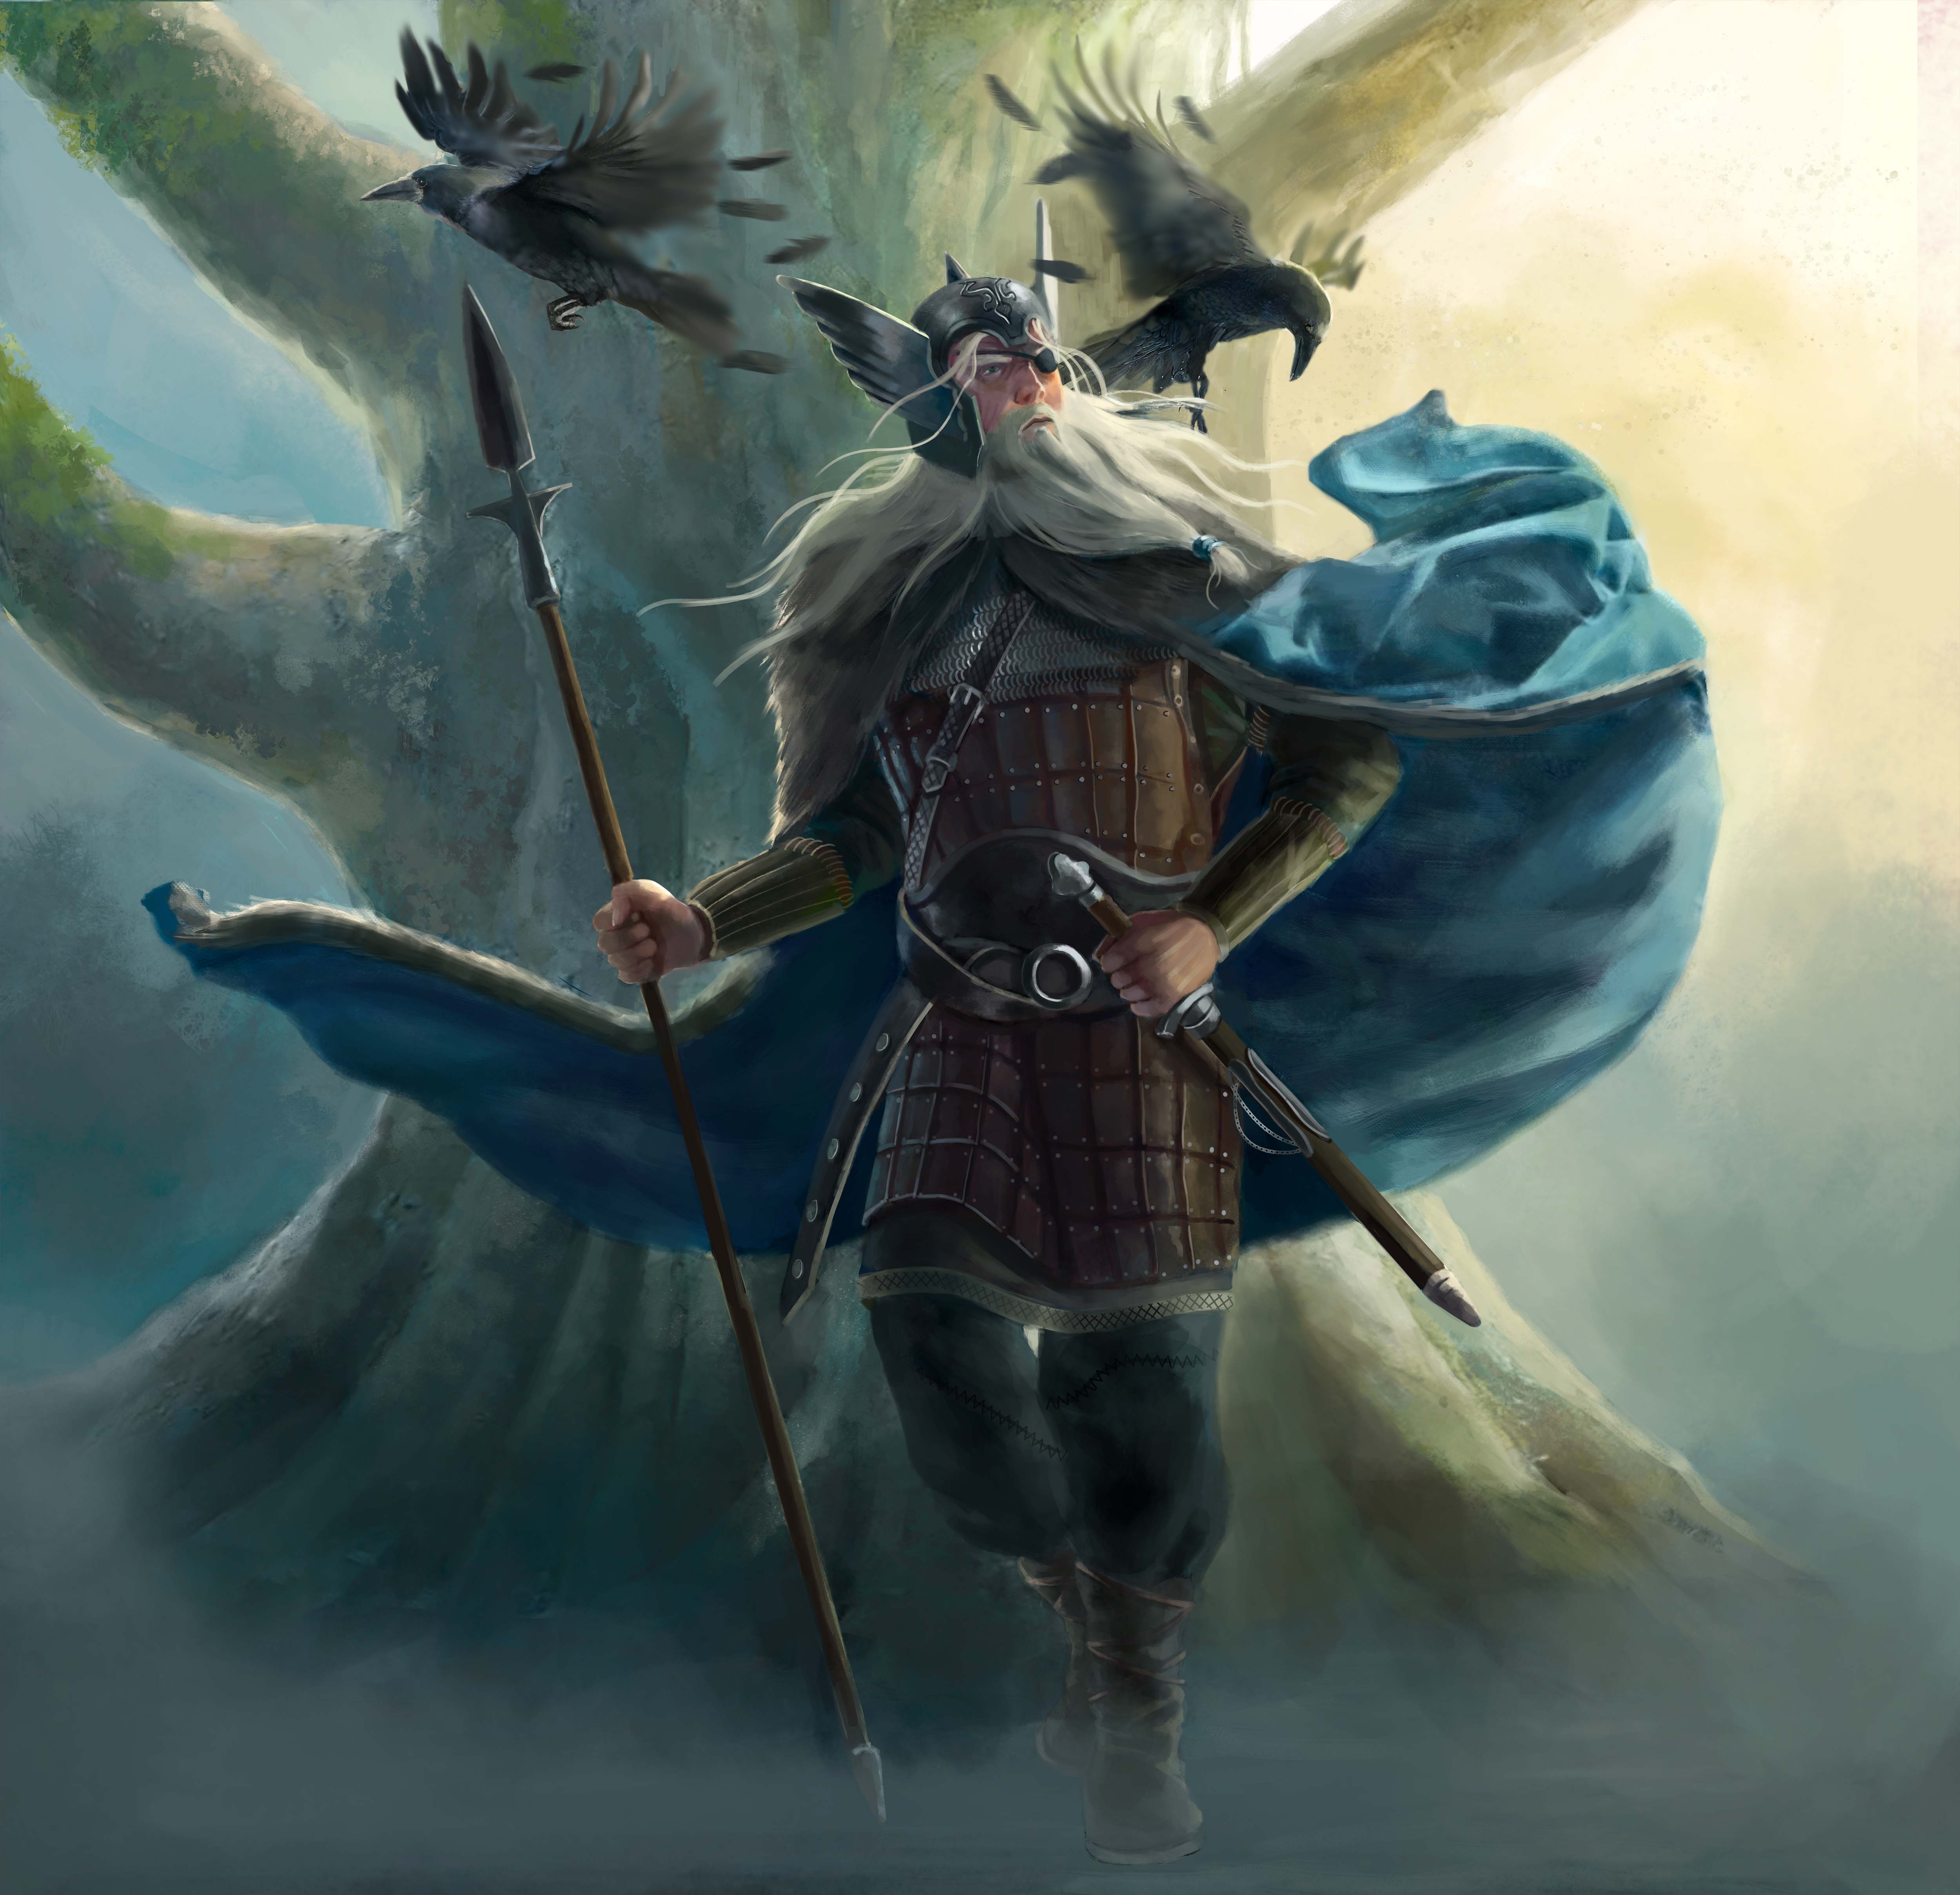 Odin stands in front of tree with spear and birds